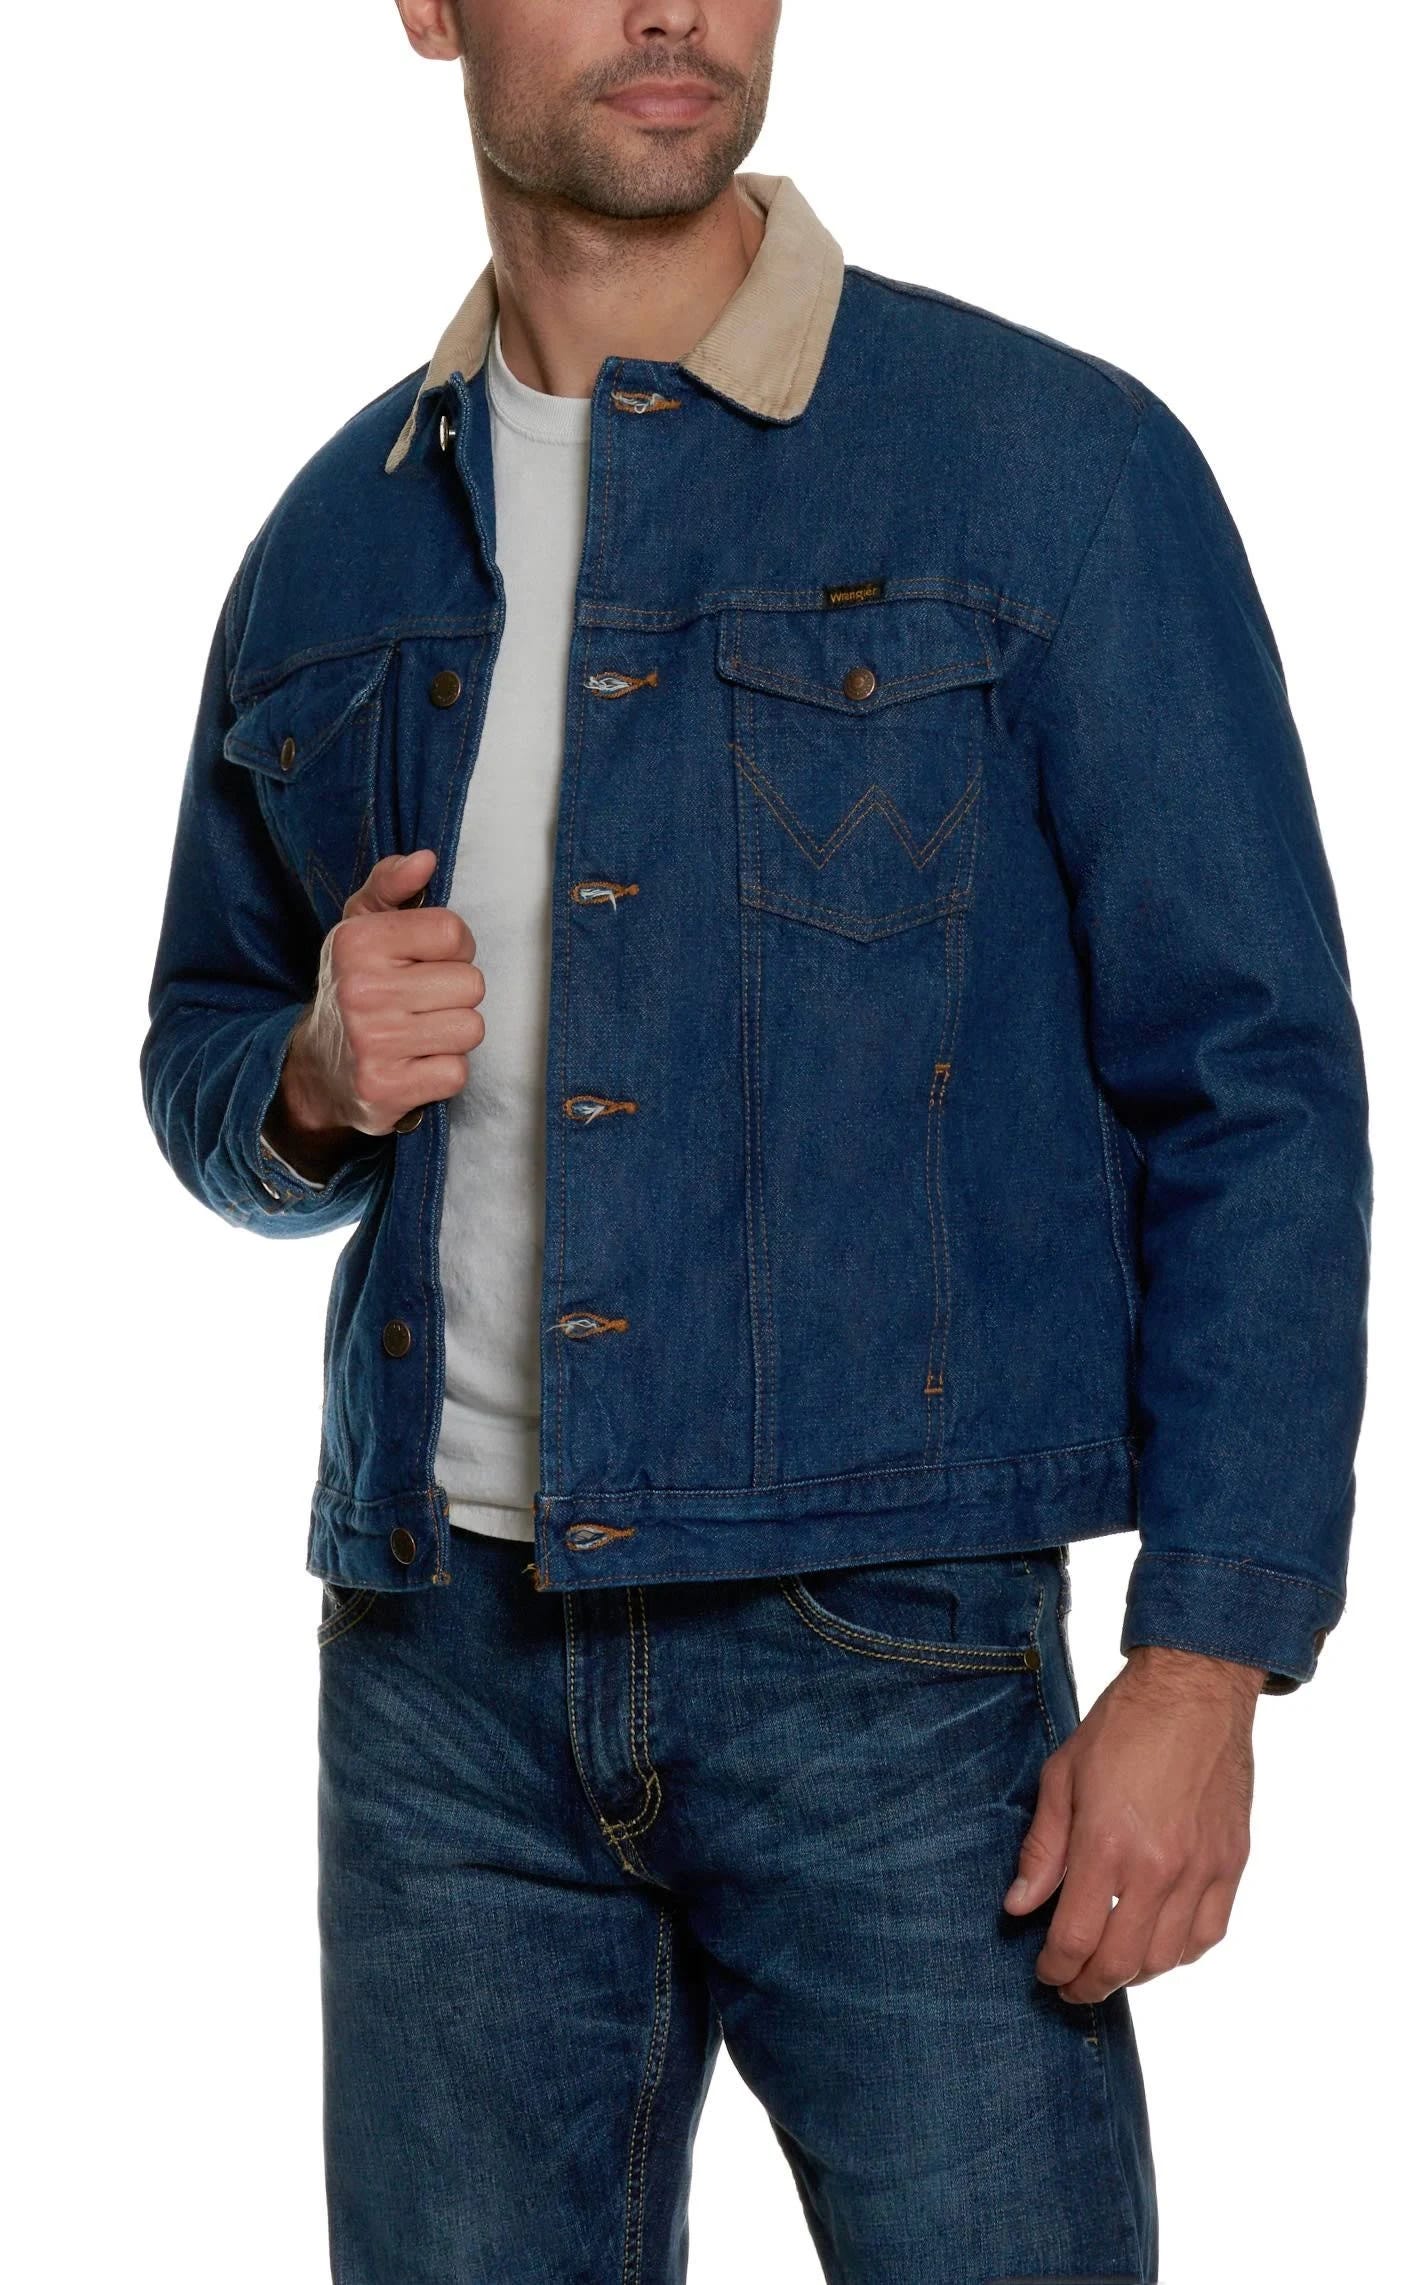 Traditional Western Wrangler Big & Tall Jean Jacket with Blanket Lining | Image